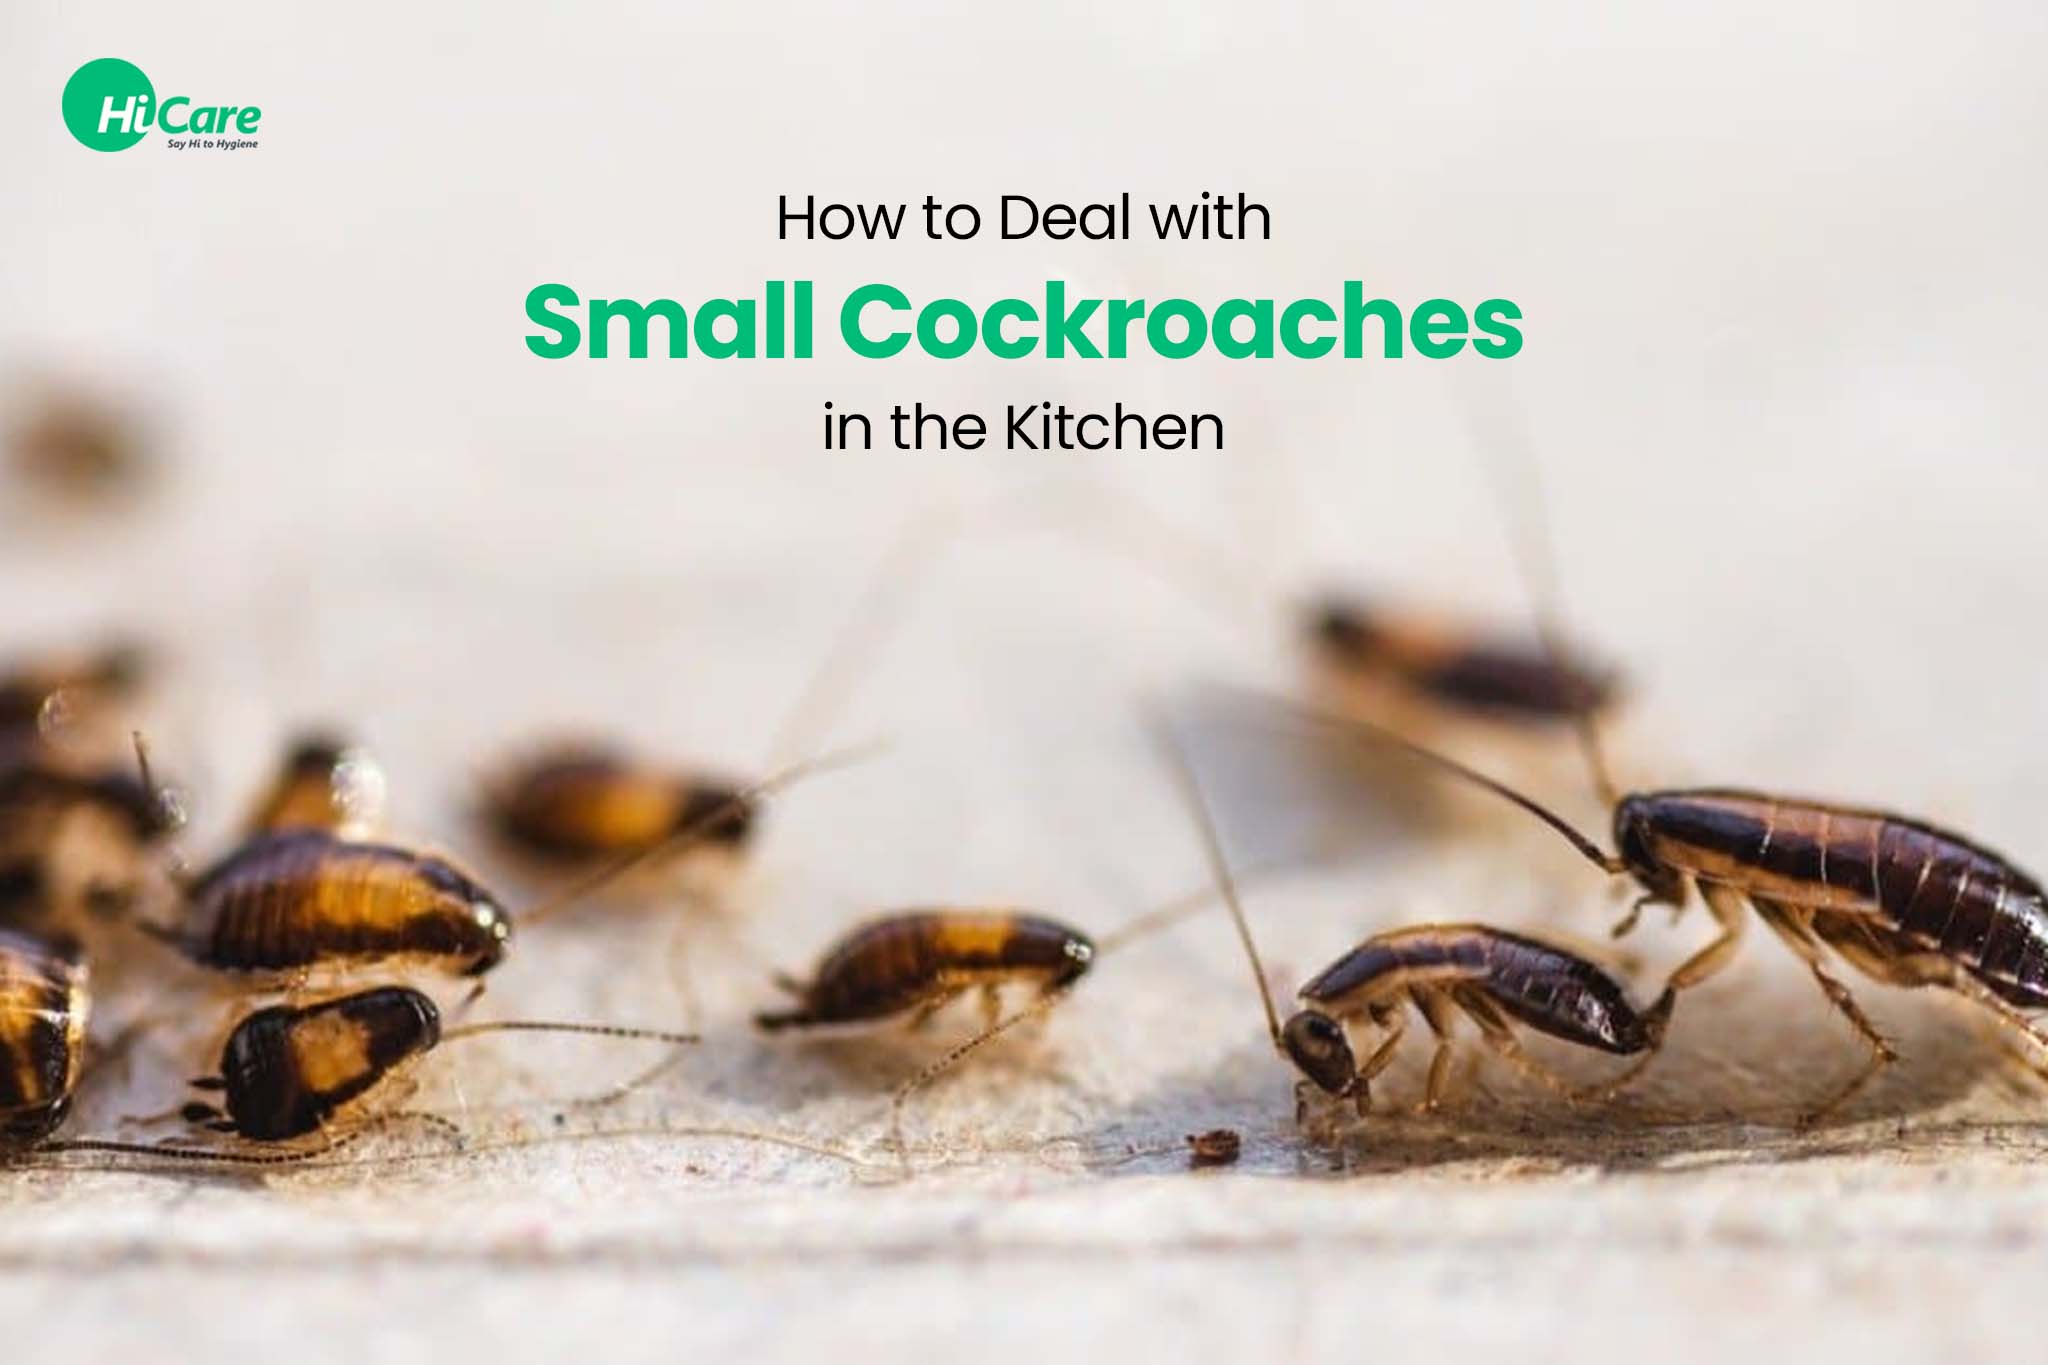 How to Prevent Cockroaches in Kitchen with These Home Remedies?